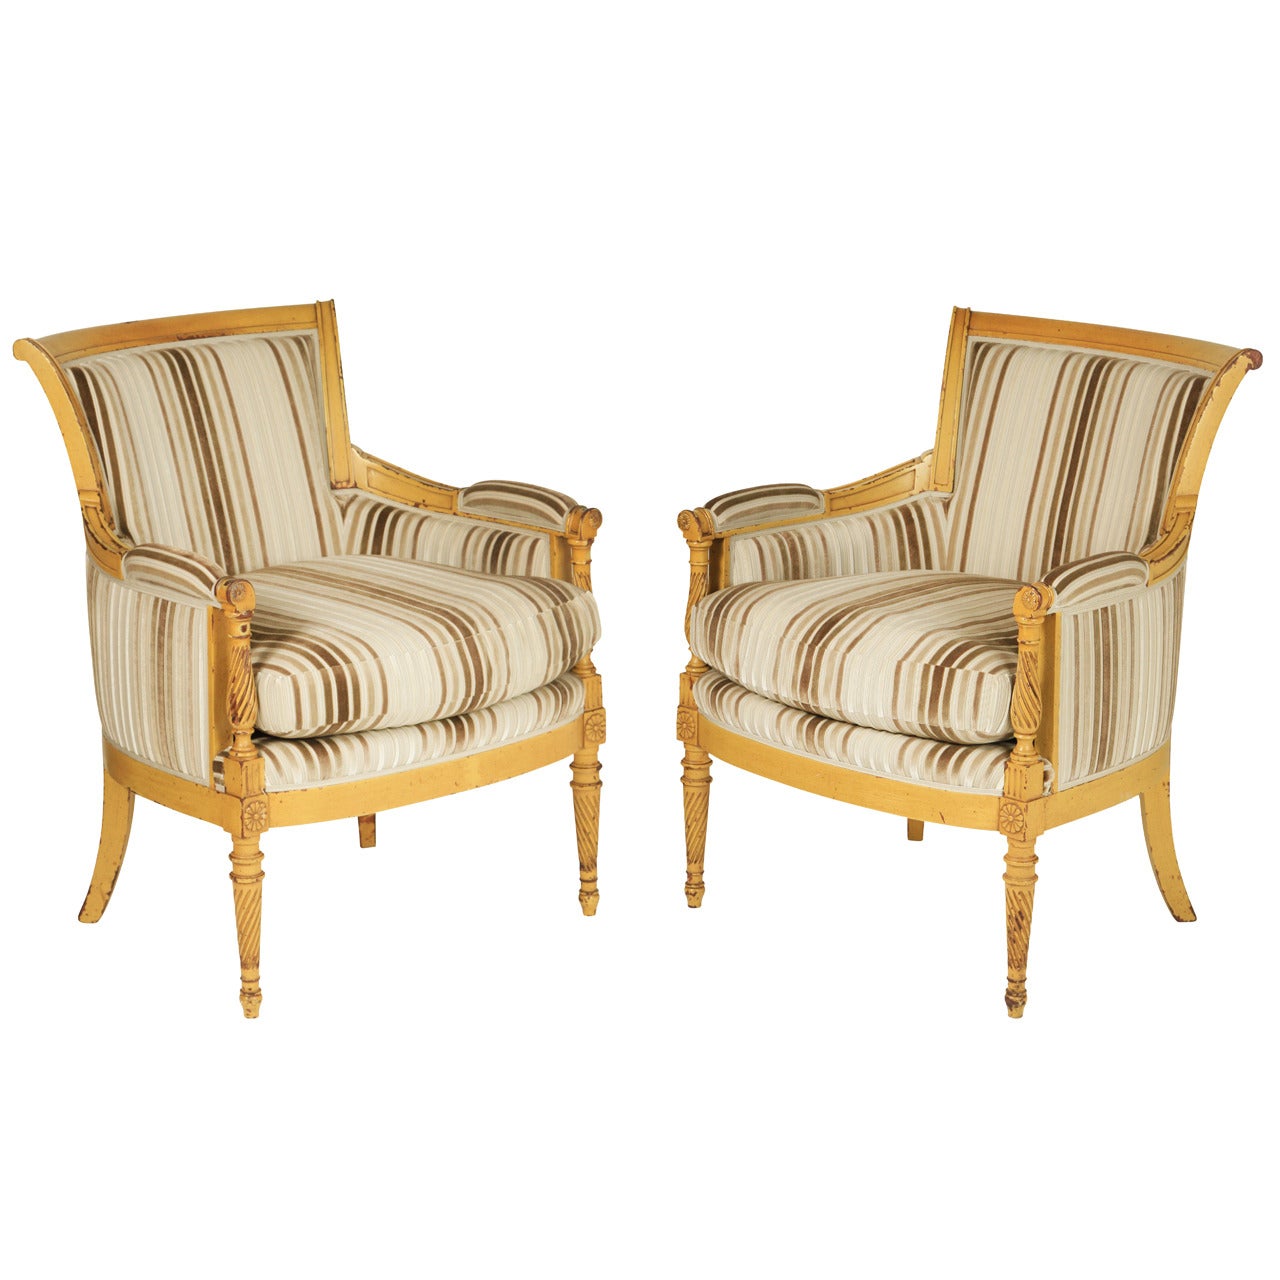 Pair of Bergere Chairs in the Directoire Style